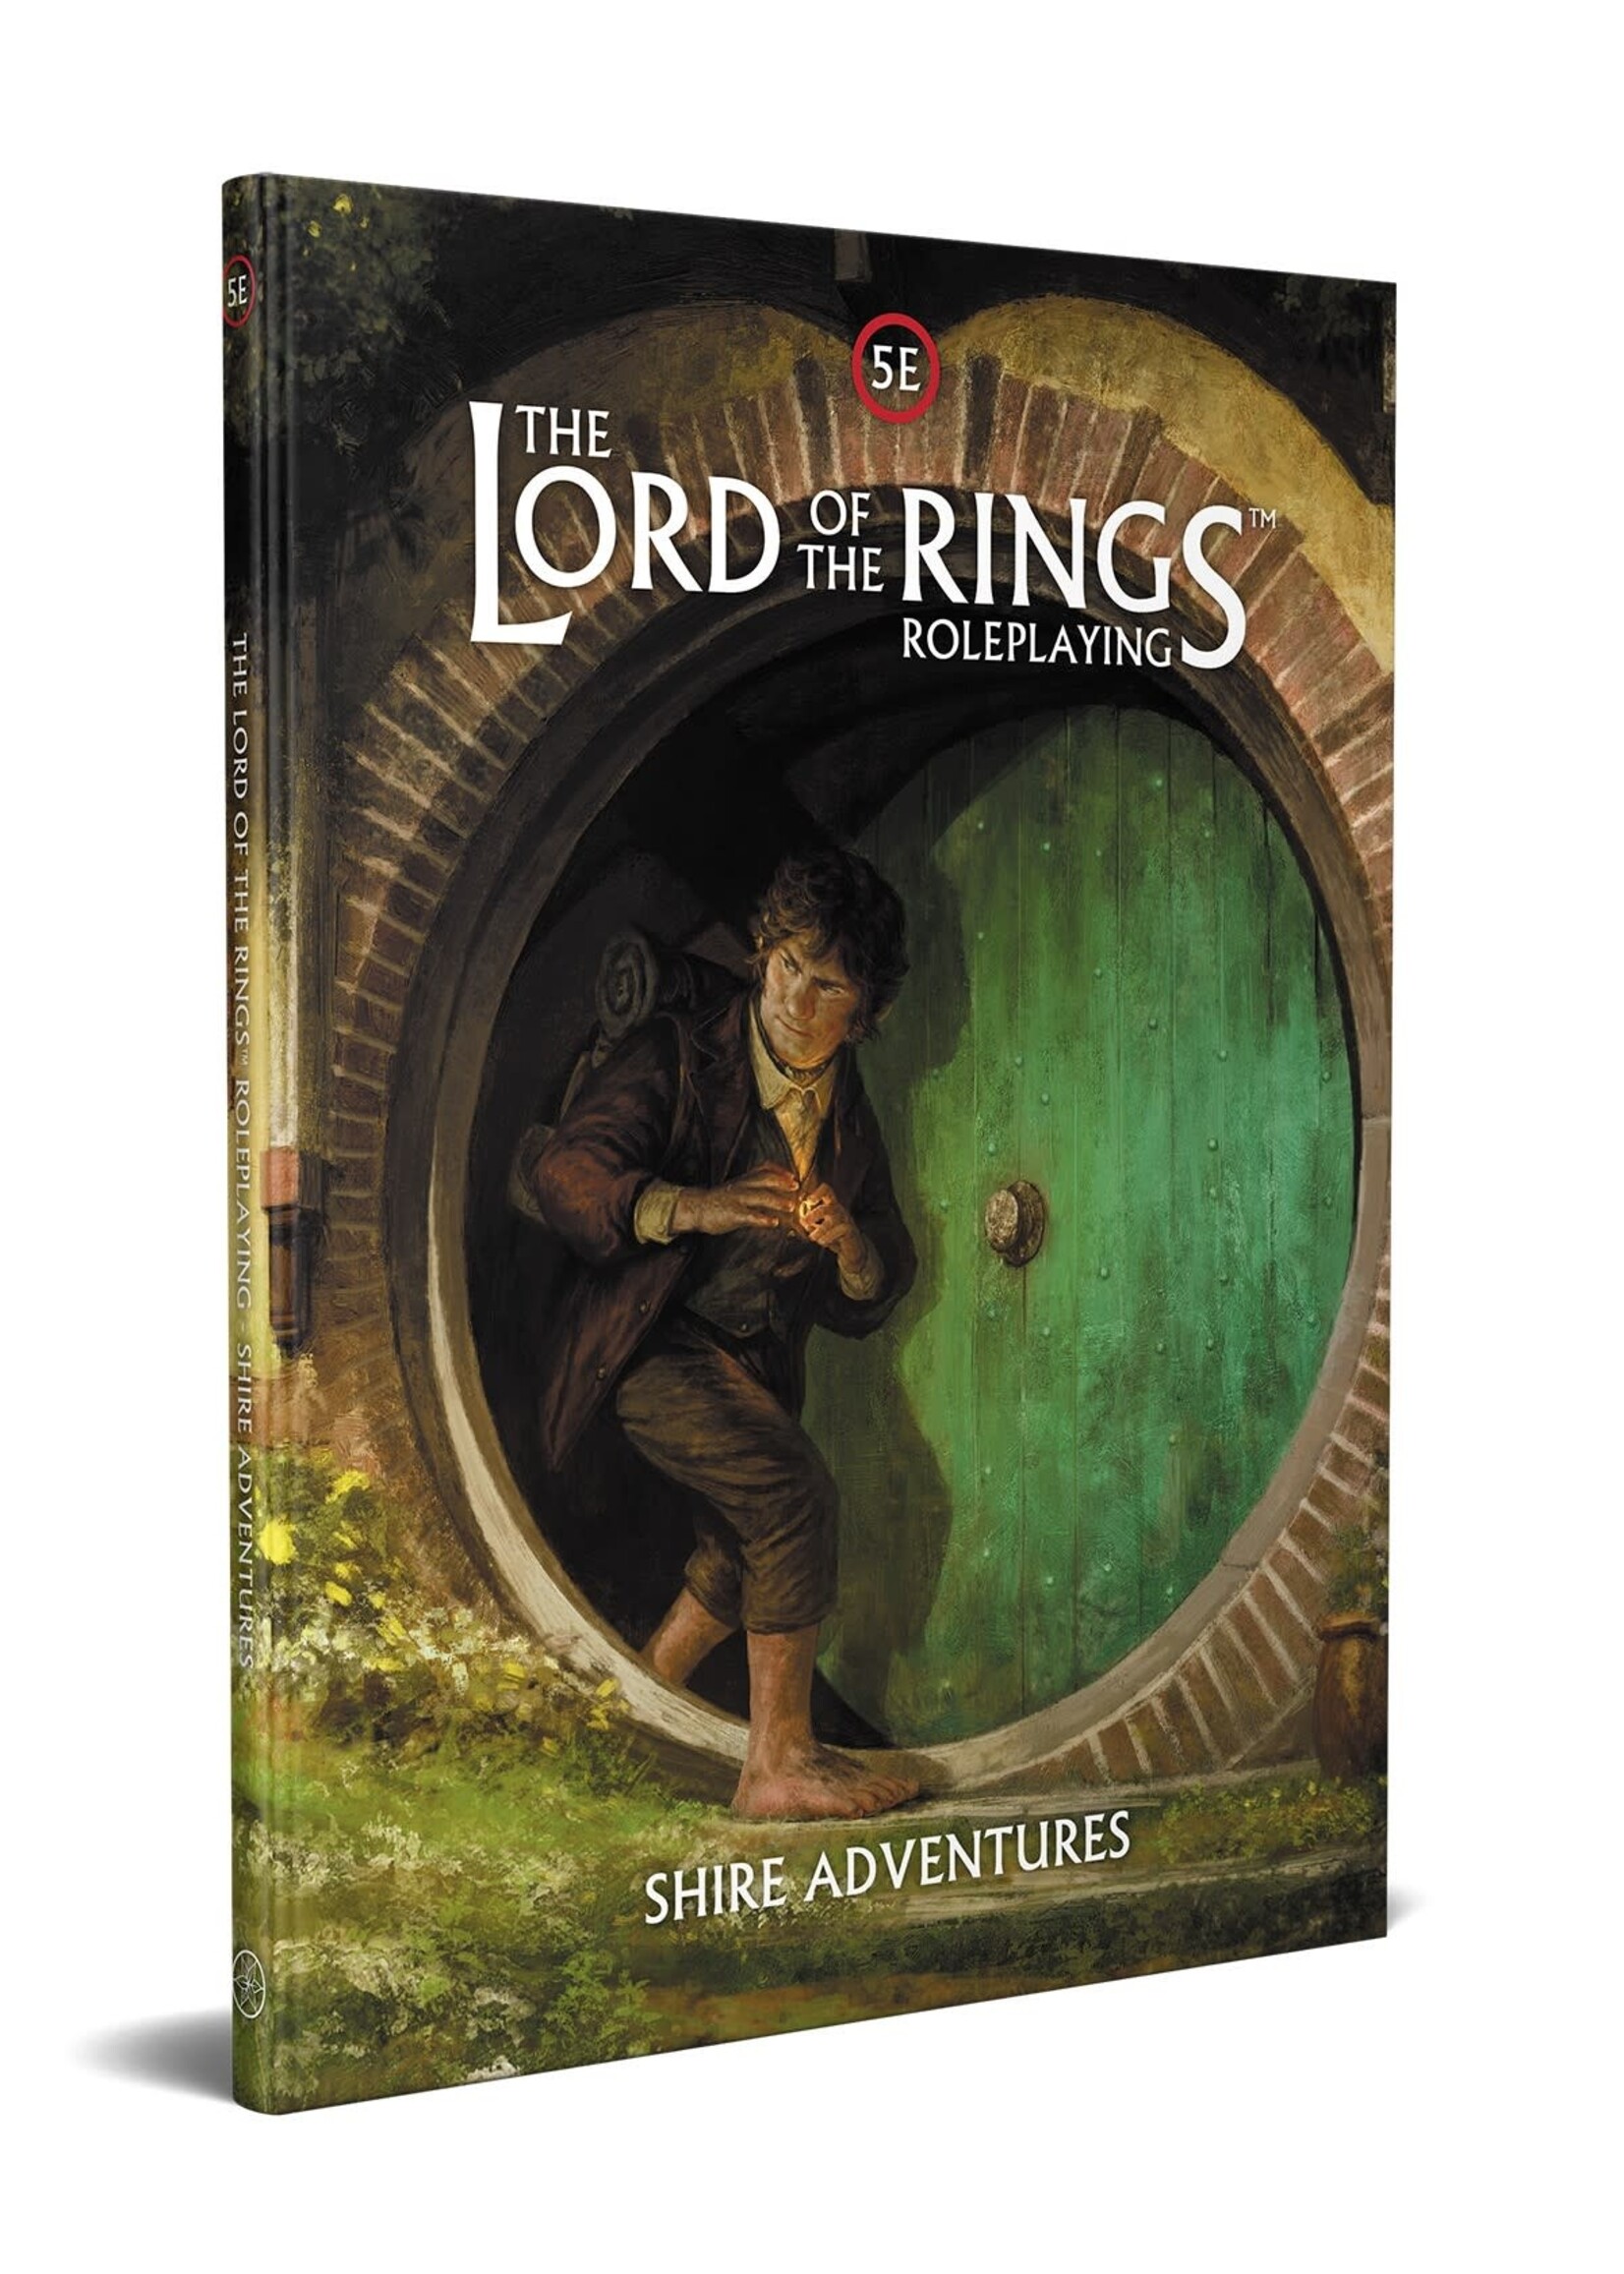 THE LORD OF THE RINGS RPG 5E SHIRE ADVENTURES